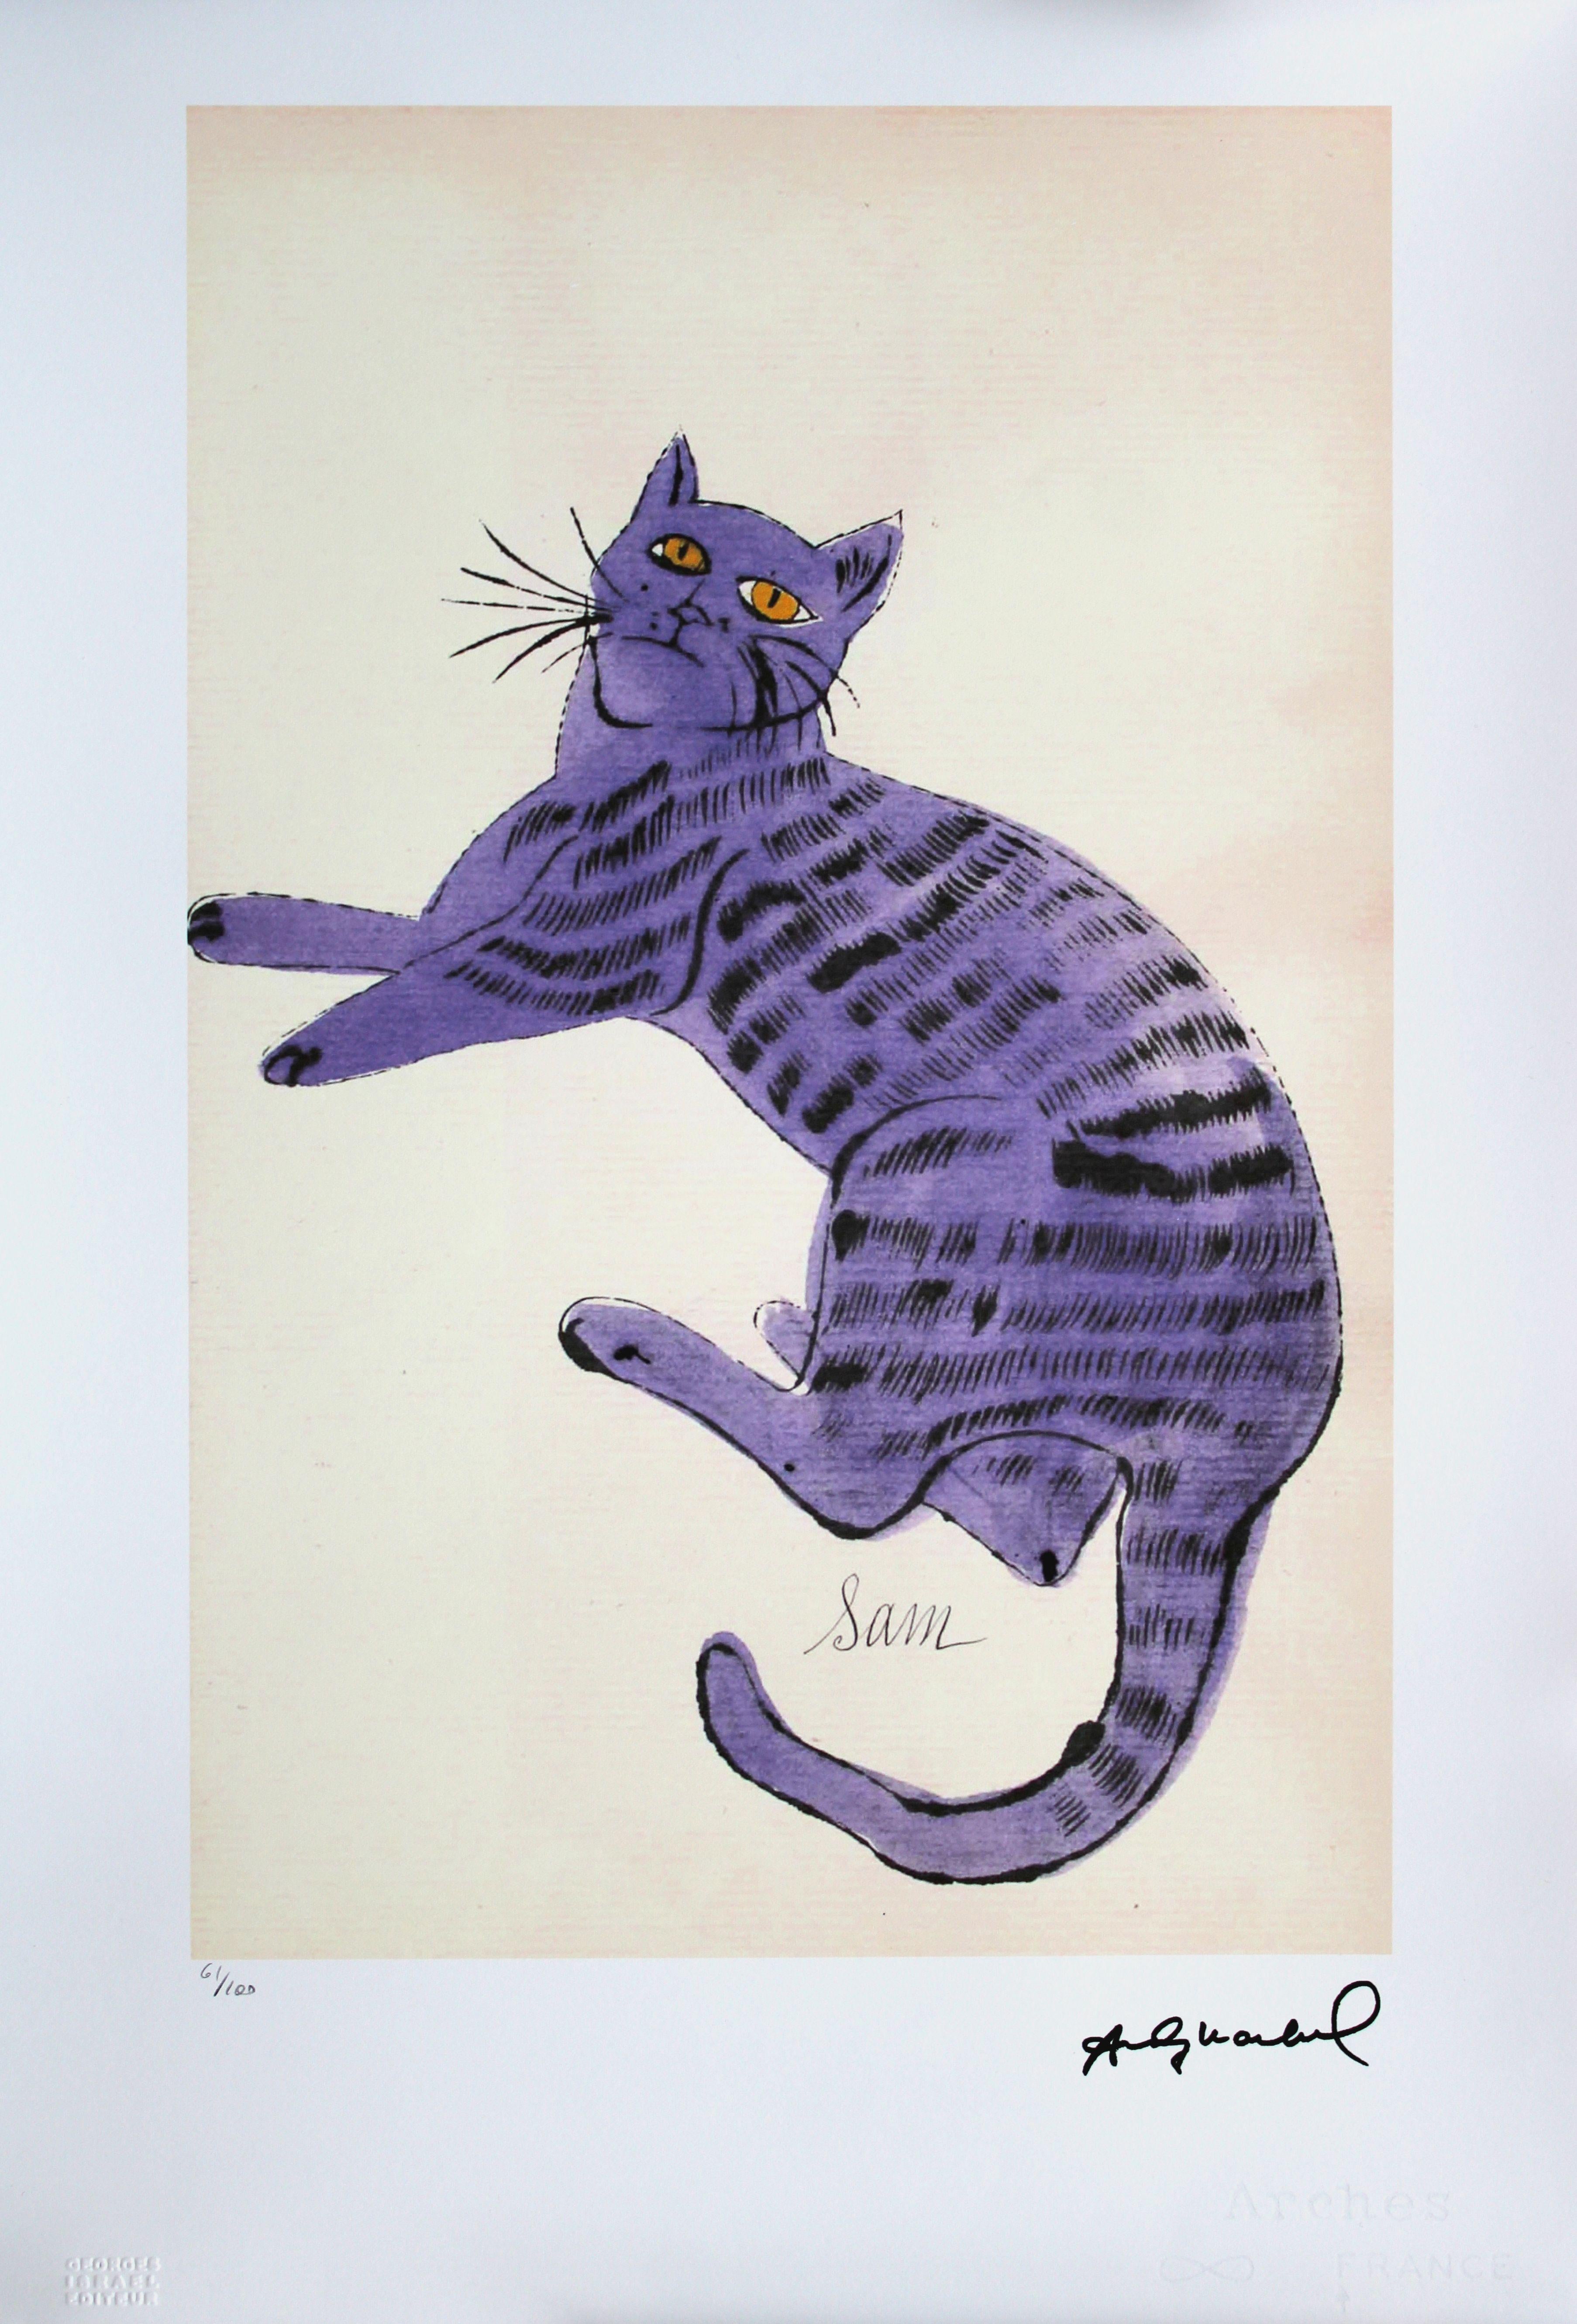 Lunar cat  61/100. Lithography, offset printing, imprint size 44x28, 5 cm - Print by Andy Warhol